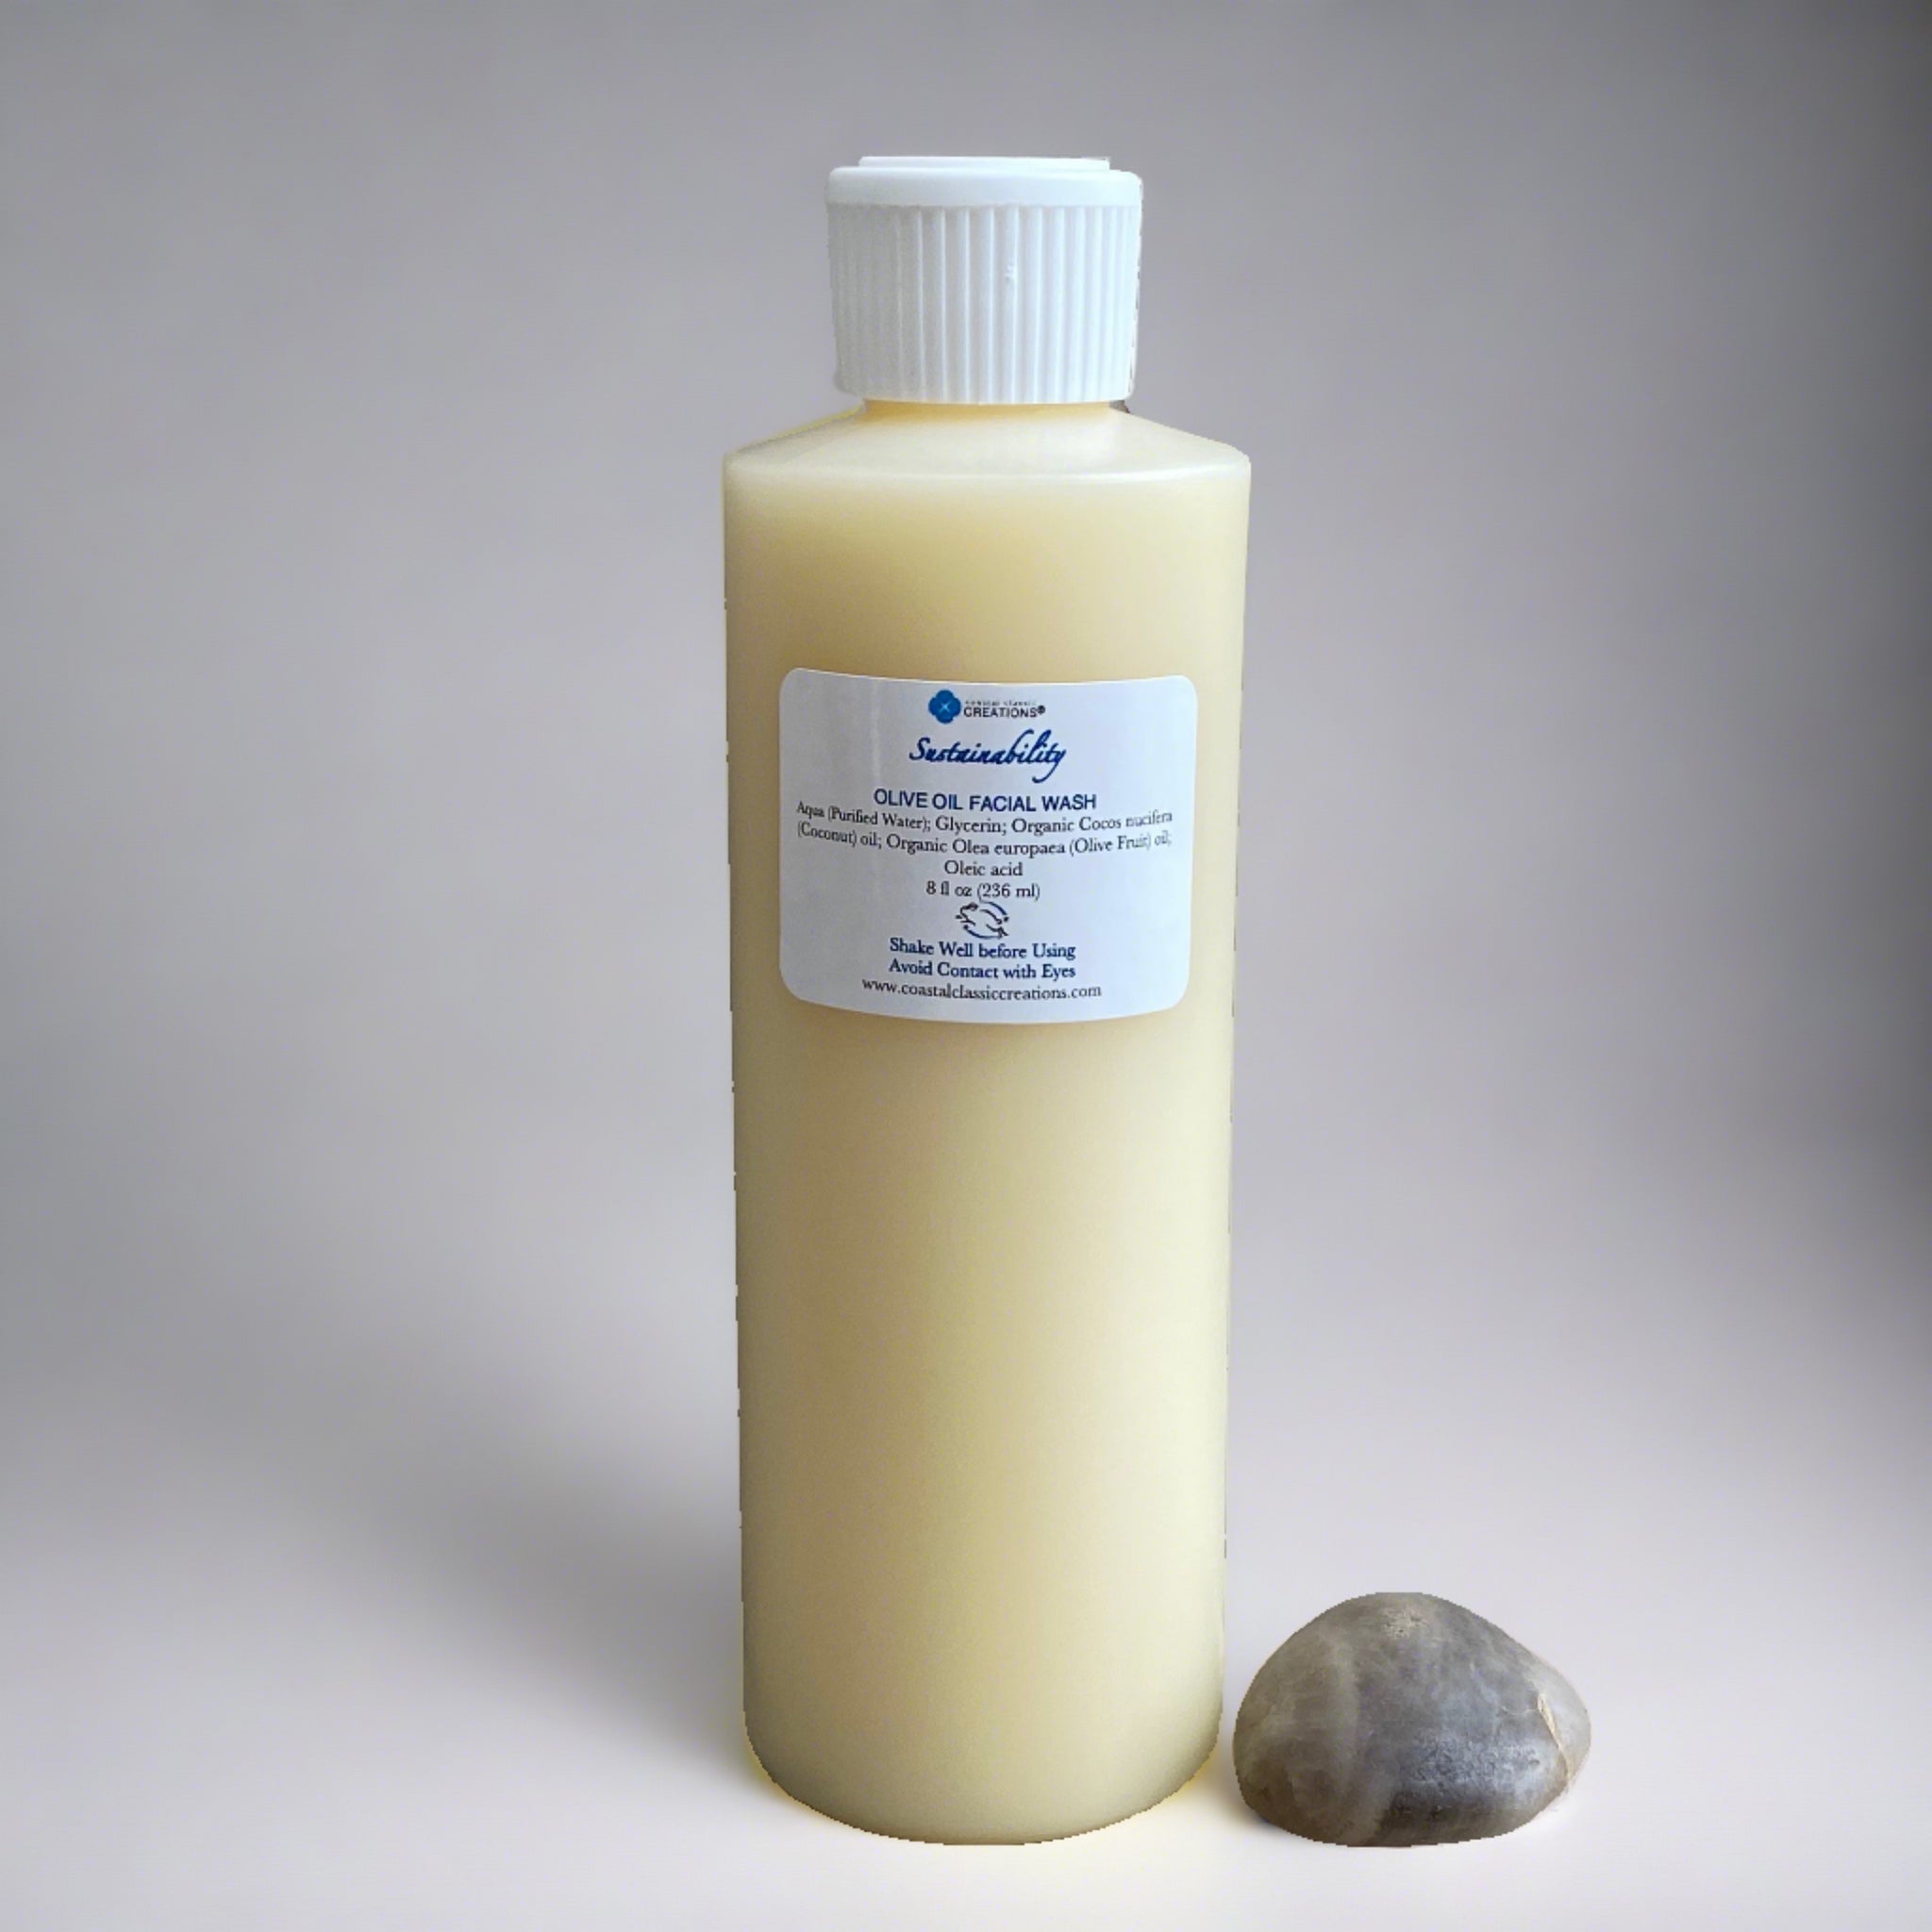 Sustainability Olive Oil Facial Wash